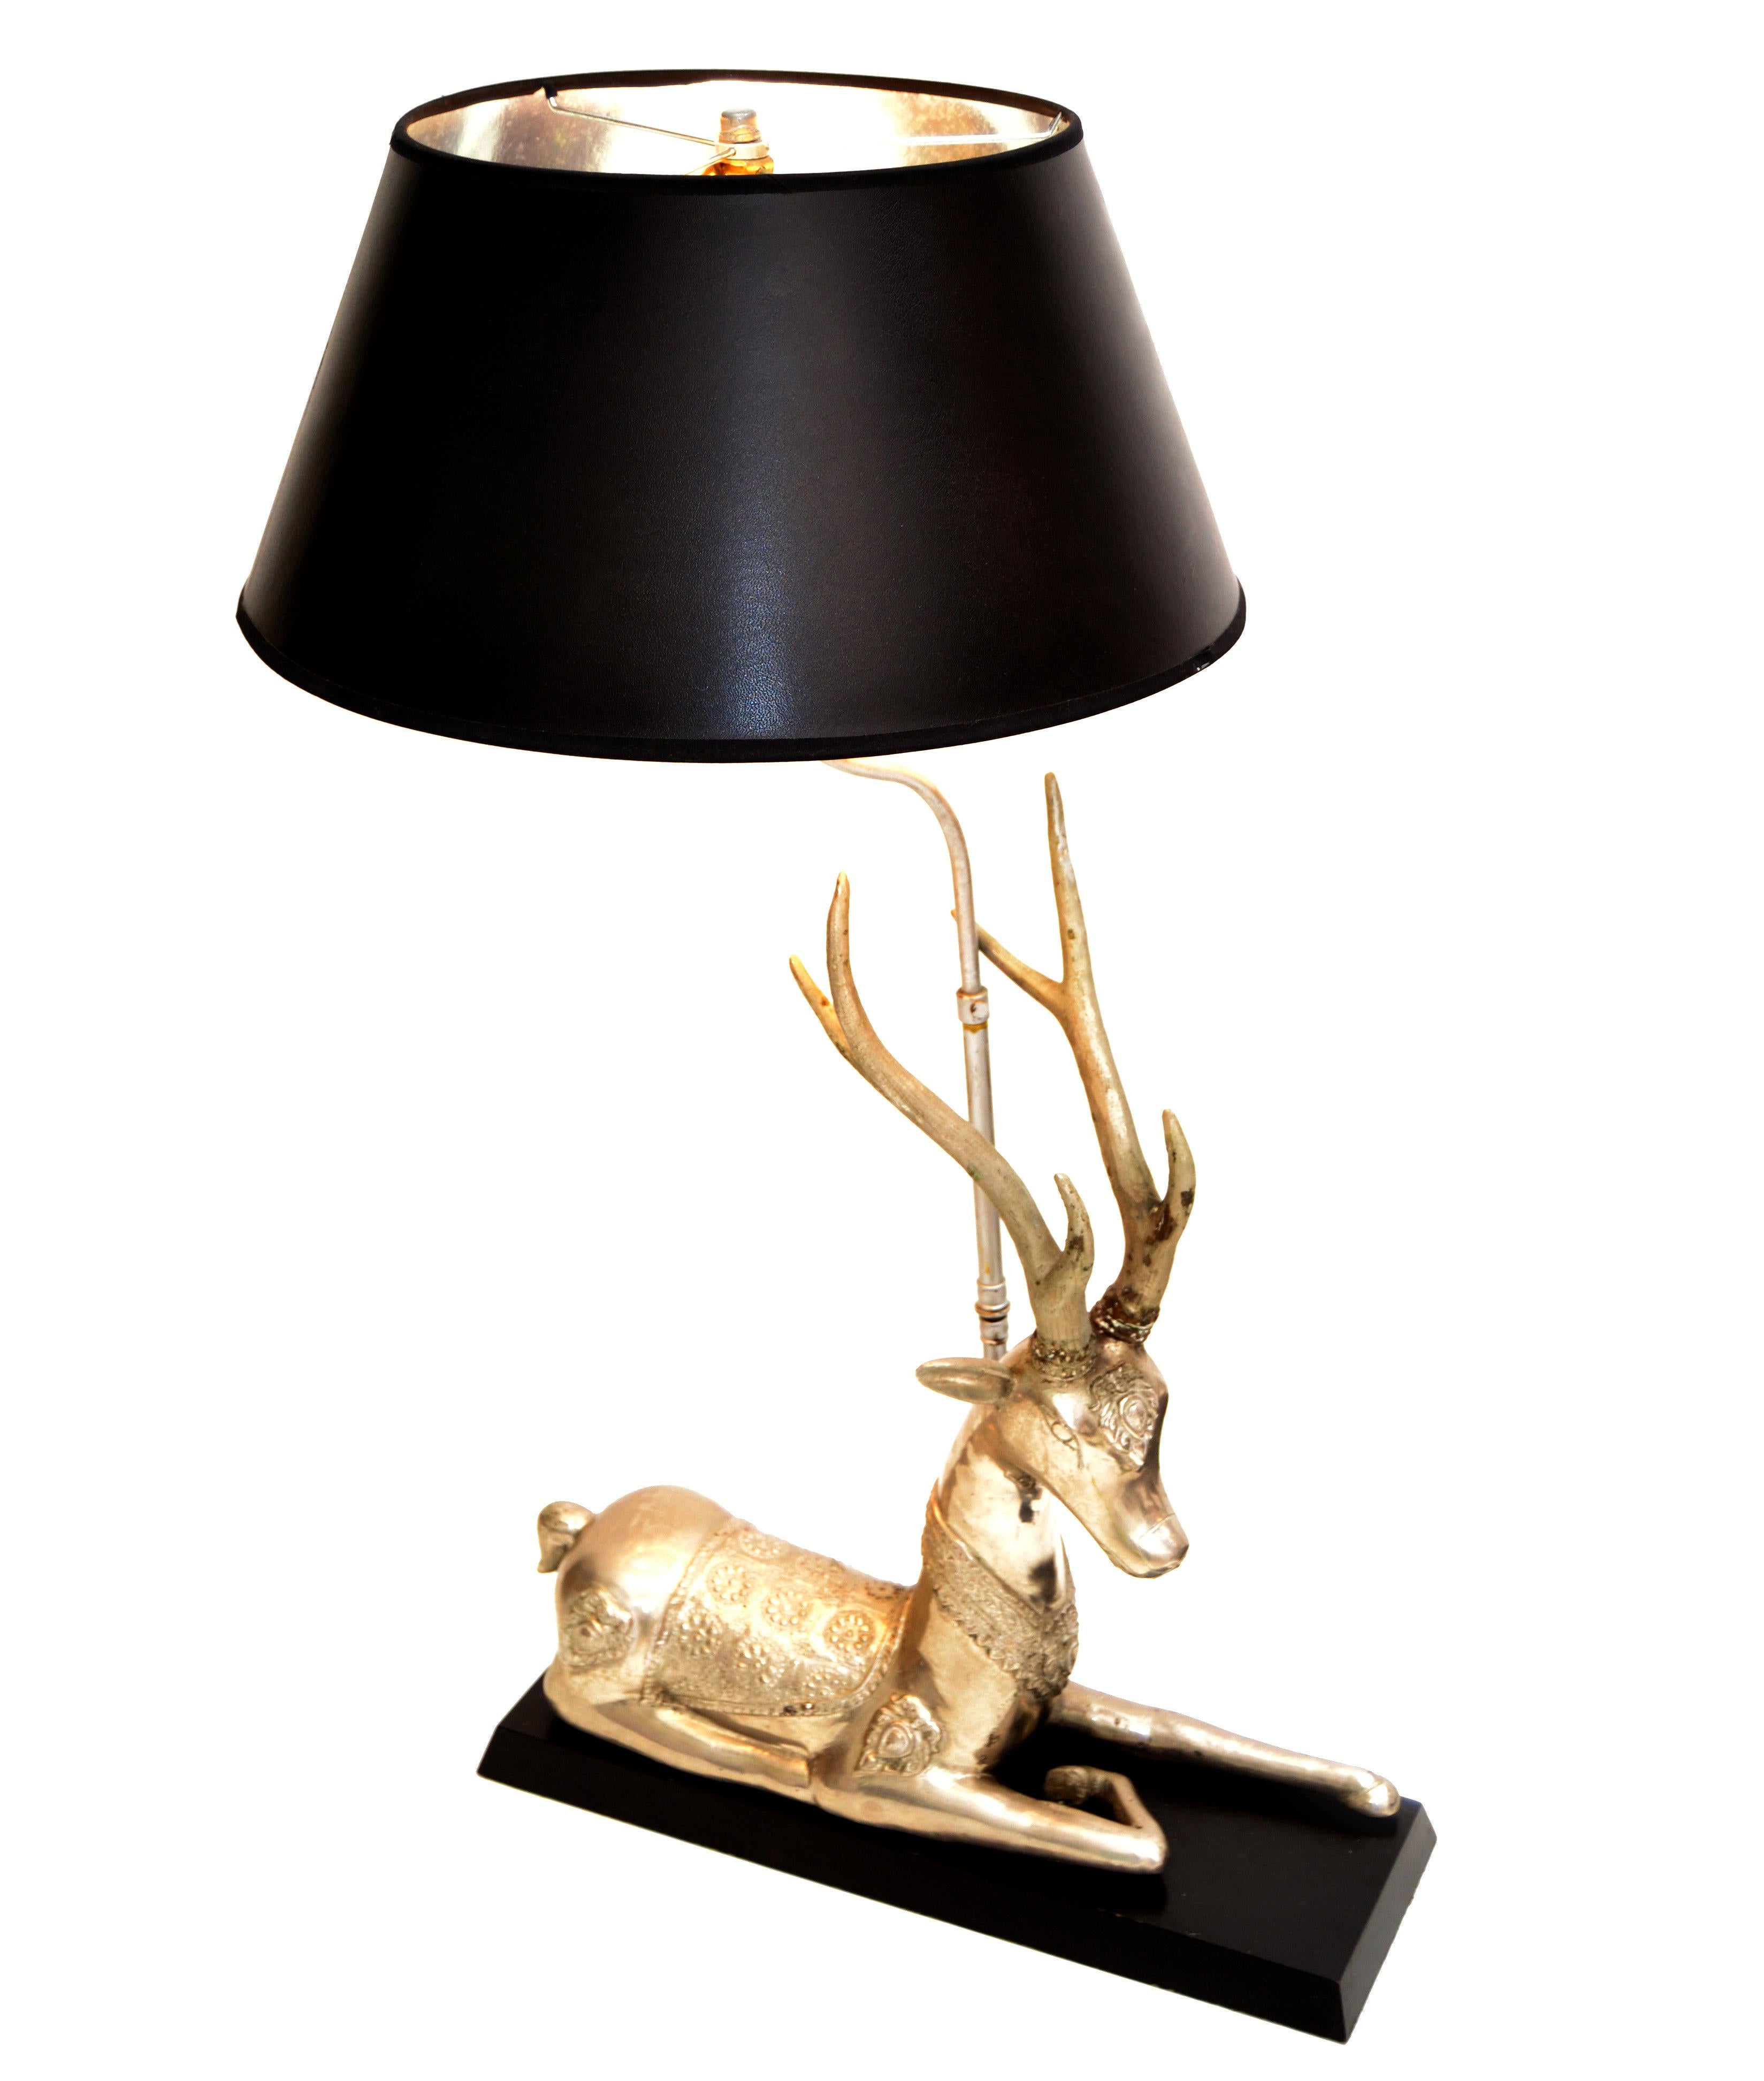 Graceful resting hand-carved silvered brass deer lamp mounted on a black lacquered wooden base.
Detailed on back and Head with extraordinary carvings.
In perfect working condition and takes 1 regular or LED bulb. 
Comes with black & silver paper